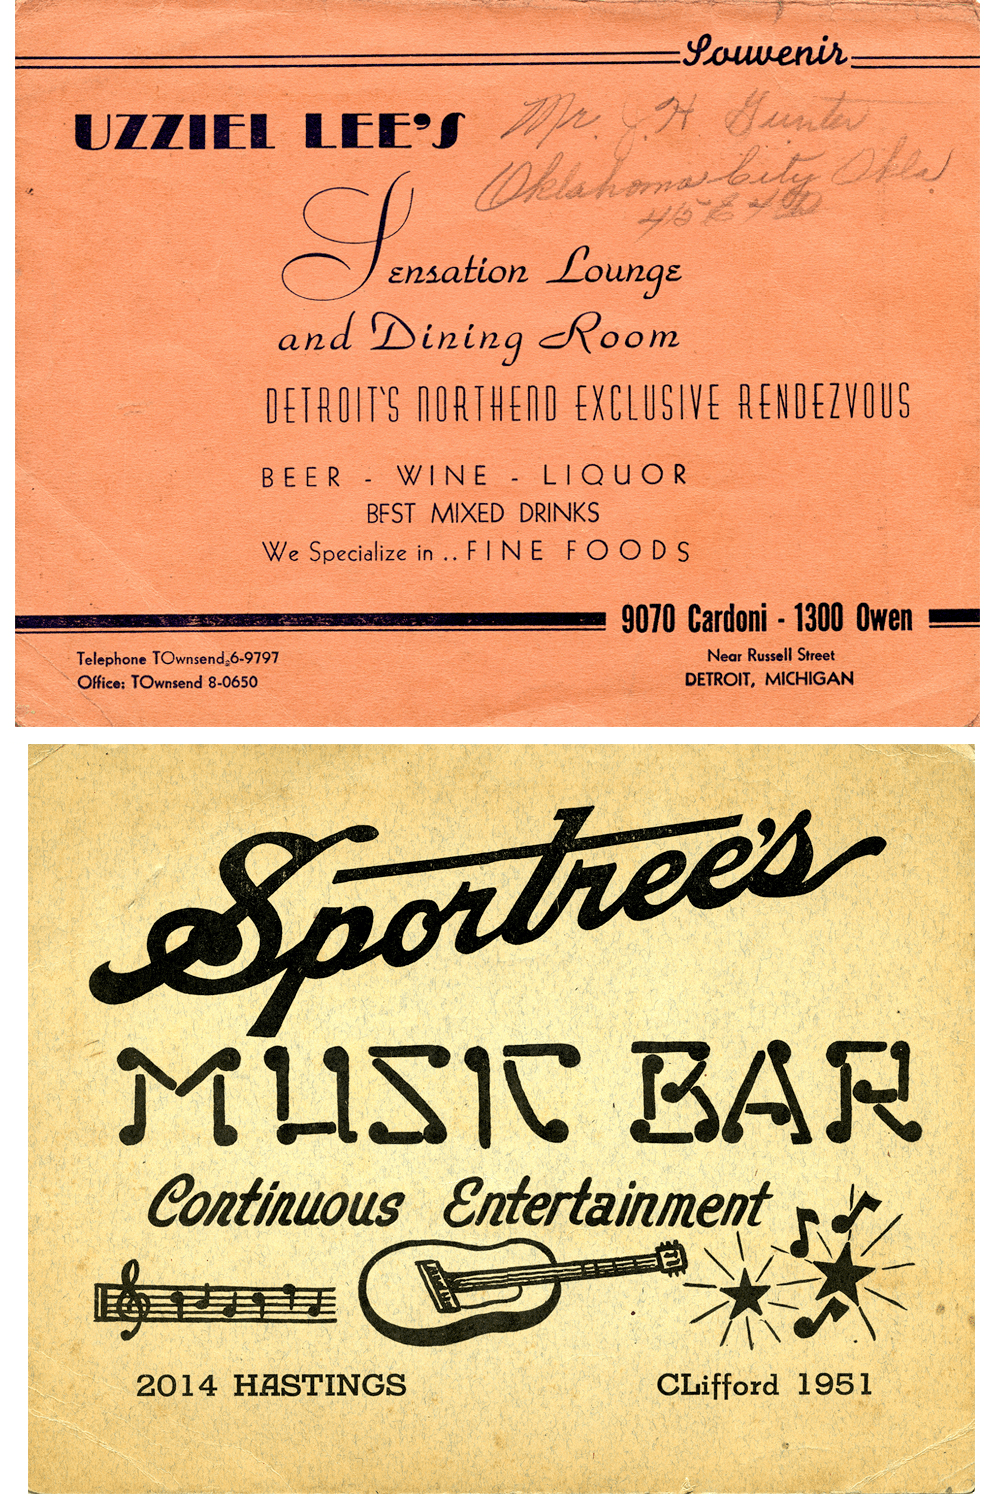 Top: Cover of a card from Uzziel Lee's Sensation Lounge and Dining Room, circa 1947. Bottom: 1940s menu card for Sportree's Music Bar, a club on Hastings Street before the construction of I-375.